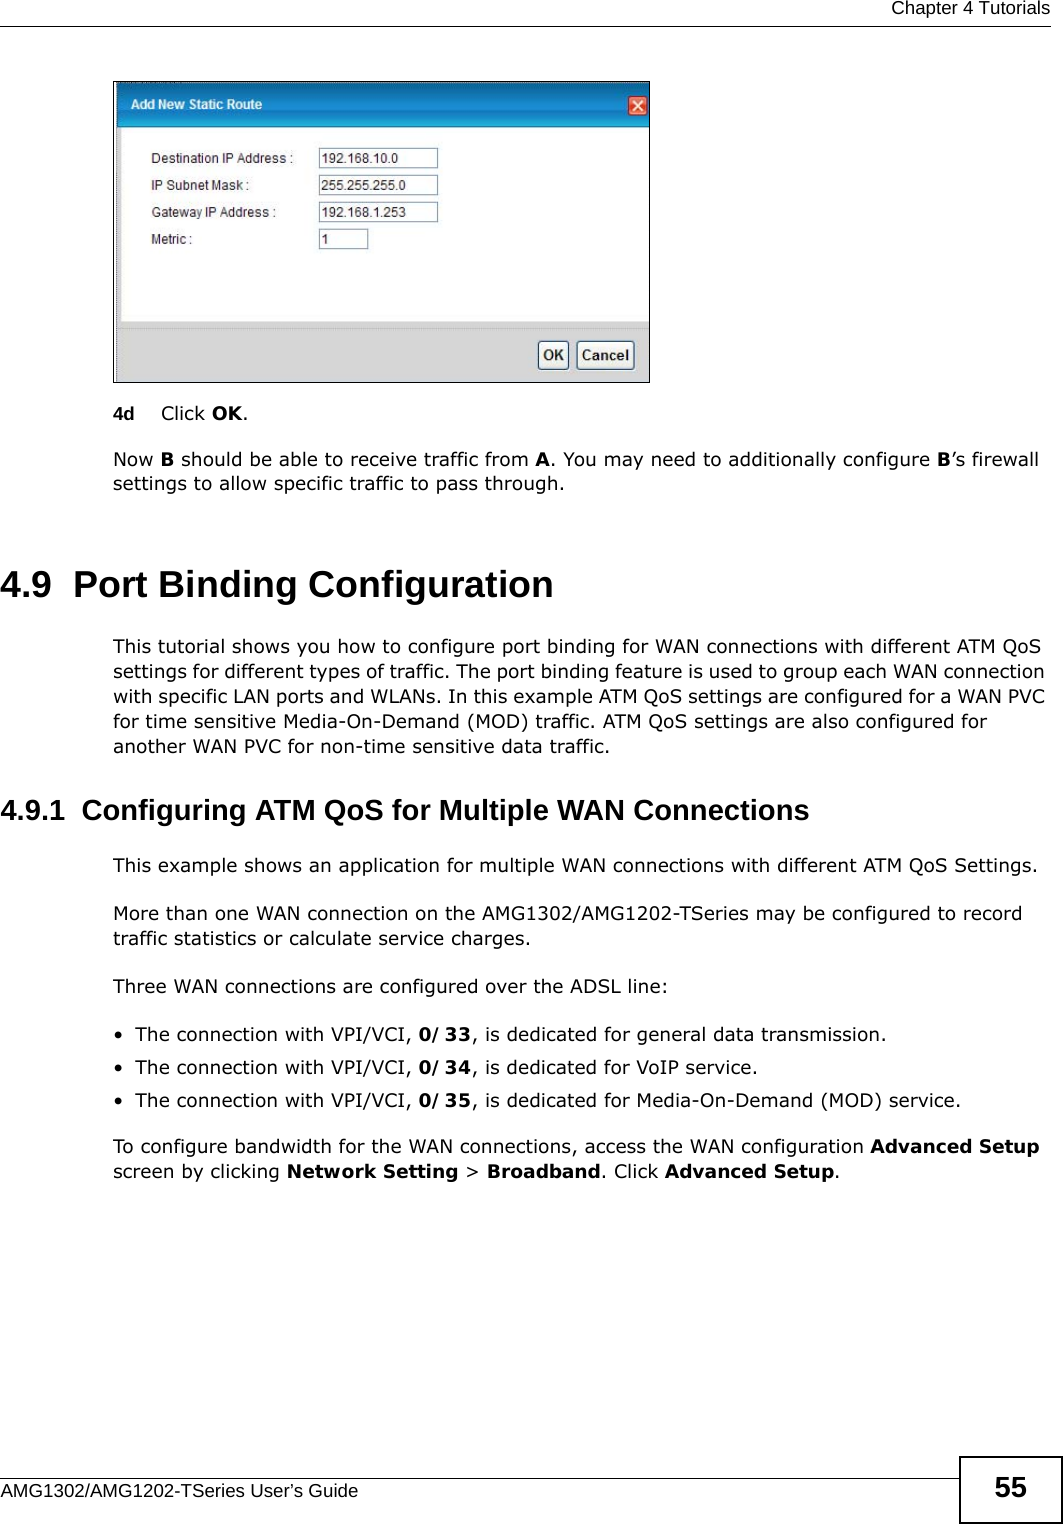  Chapter 4 TutorialsAMG1302/AMG1202-TSeries User’s Guide 554d Click OK.Now B should be able to receive traffic from A. You may need to additionally configure B’s firewall settings to allow specific traffic to pass through. 4.9  Port Binding ConfigurationThis tutorial shows you how to configure port binding for WAN connections with different ATM QoS settings for different types of traffic. The port binding feature is used to group each WAN connection with specific LAN ports and WLANs. In this example ATM QoS settings are configured for a WAN PVC for time sensitive Media-On-Demand (MOD) traffic. ATM QoS settings are also configured for another WAN PVC for non-time sensitive data traffic. 4.9.1  Configuring ATM QoS for Multiple WAN ConnectionsThis example shows an application for multiple WAN connections with different ATM QoS Settings.More than one WAN connection on the AMG1302/AMG1202-TSeries may be configured to record traffic statistics or calculate service charges.Three WAN connections are configured over the ADSL line:• The connection with VPI/VCI, 0/33, is dedicated for general data transmission.• The connection with VPI/VCI, 0/34, is dedicated for VoIP service.• The connection with VPI/VCI, 0/35, is dedicated for Media-On-Demand (MOD) service.To configure bandwidth for the WAN connections, access the WAN configuration Advanced Setup screen by clicking Network Setting &gt; Broadband. Click Advanced Setup.